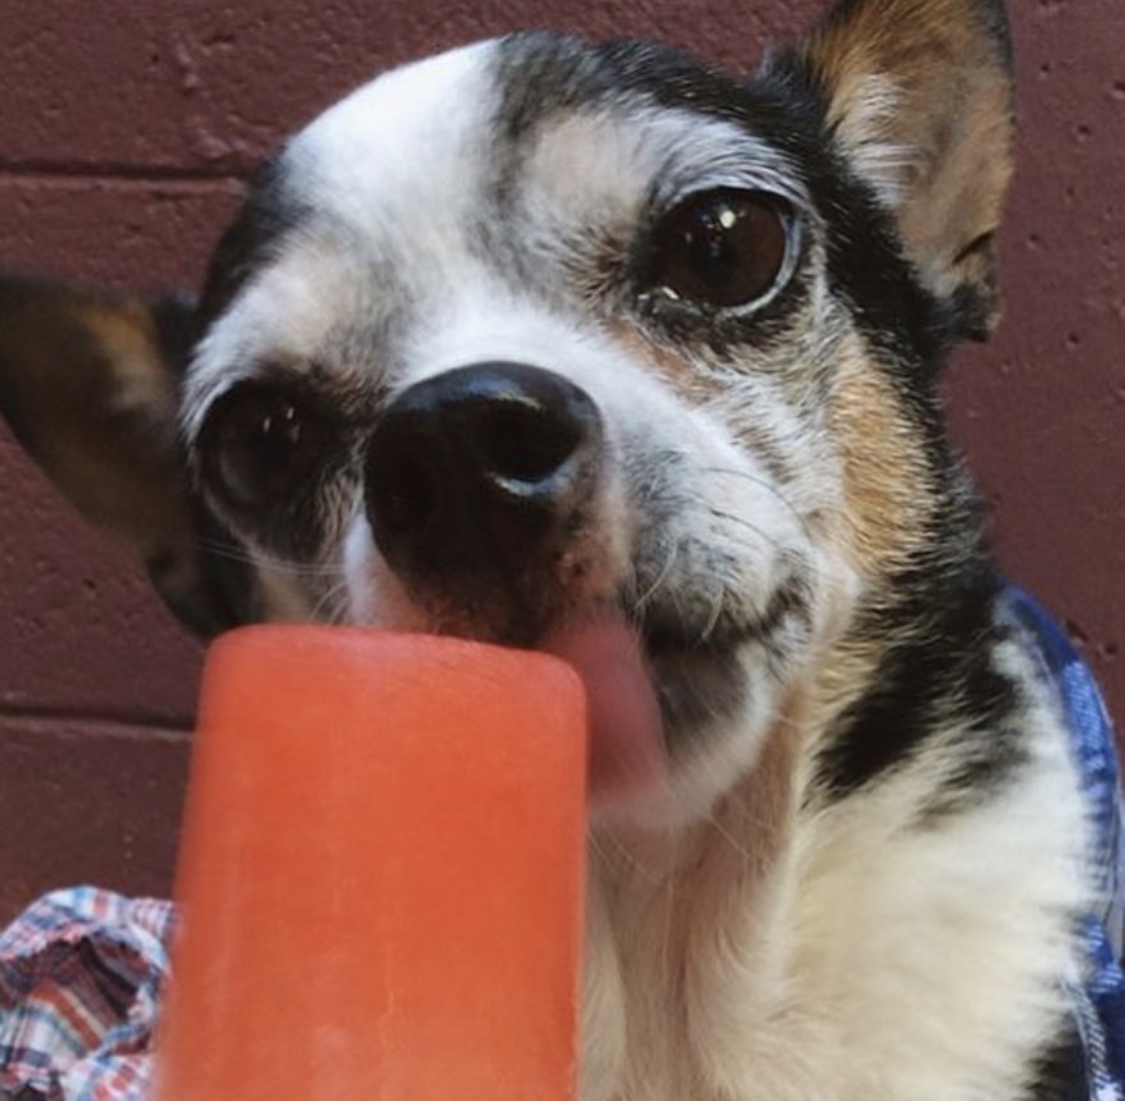 A Chihuahua licking popsicle